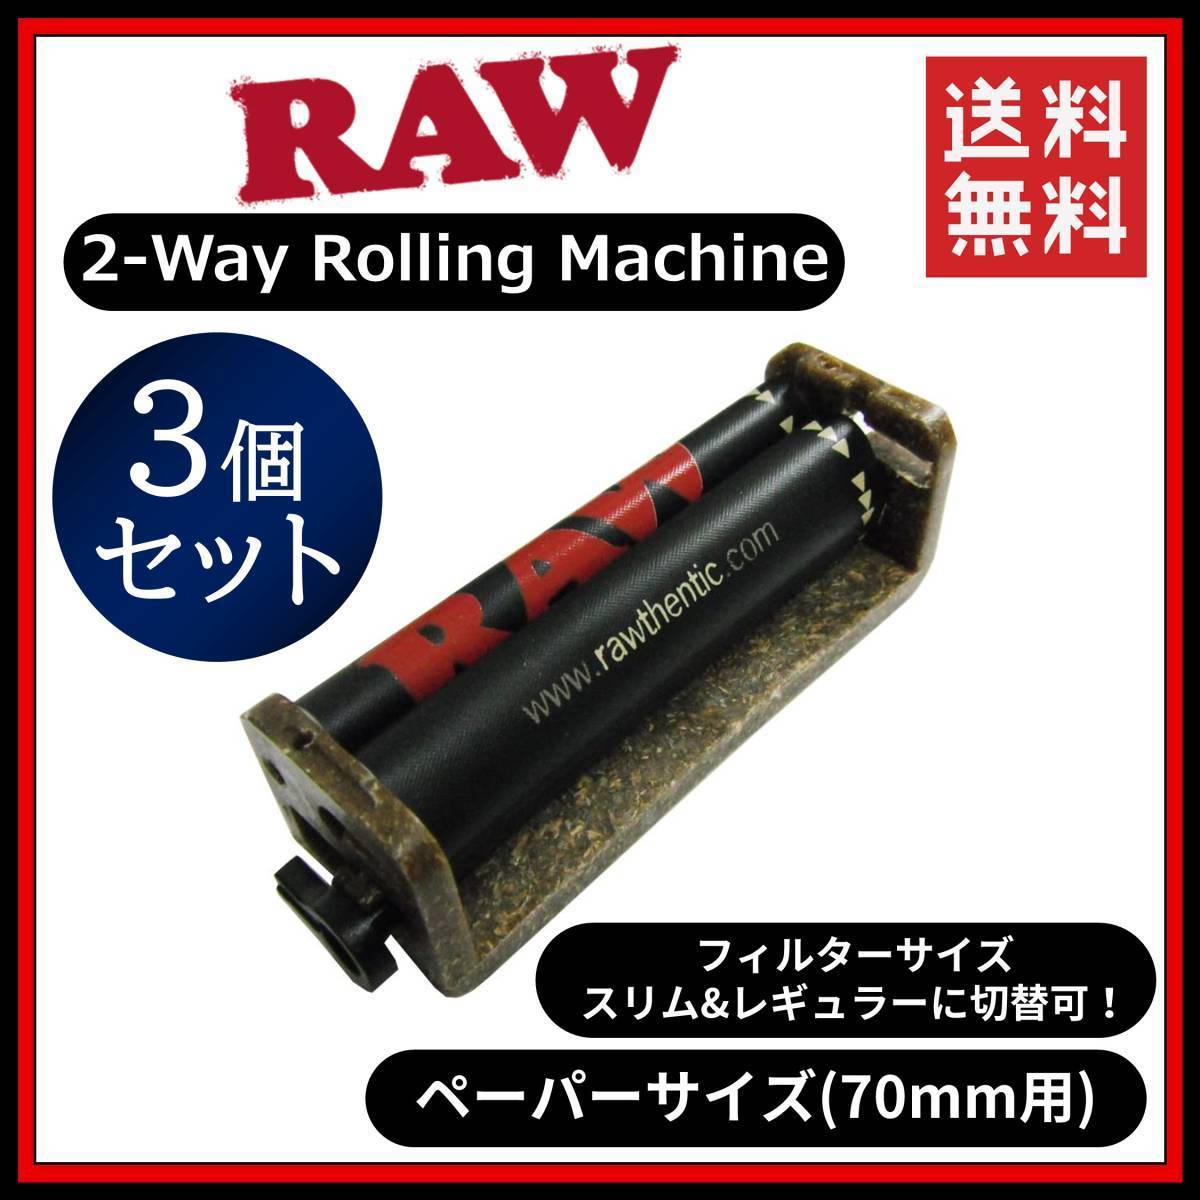 [ free shipping ]RAW 2Way roller 70mm 3 piece set hand winding cigarettes smoke .smo- King filter paper B1203